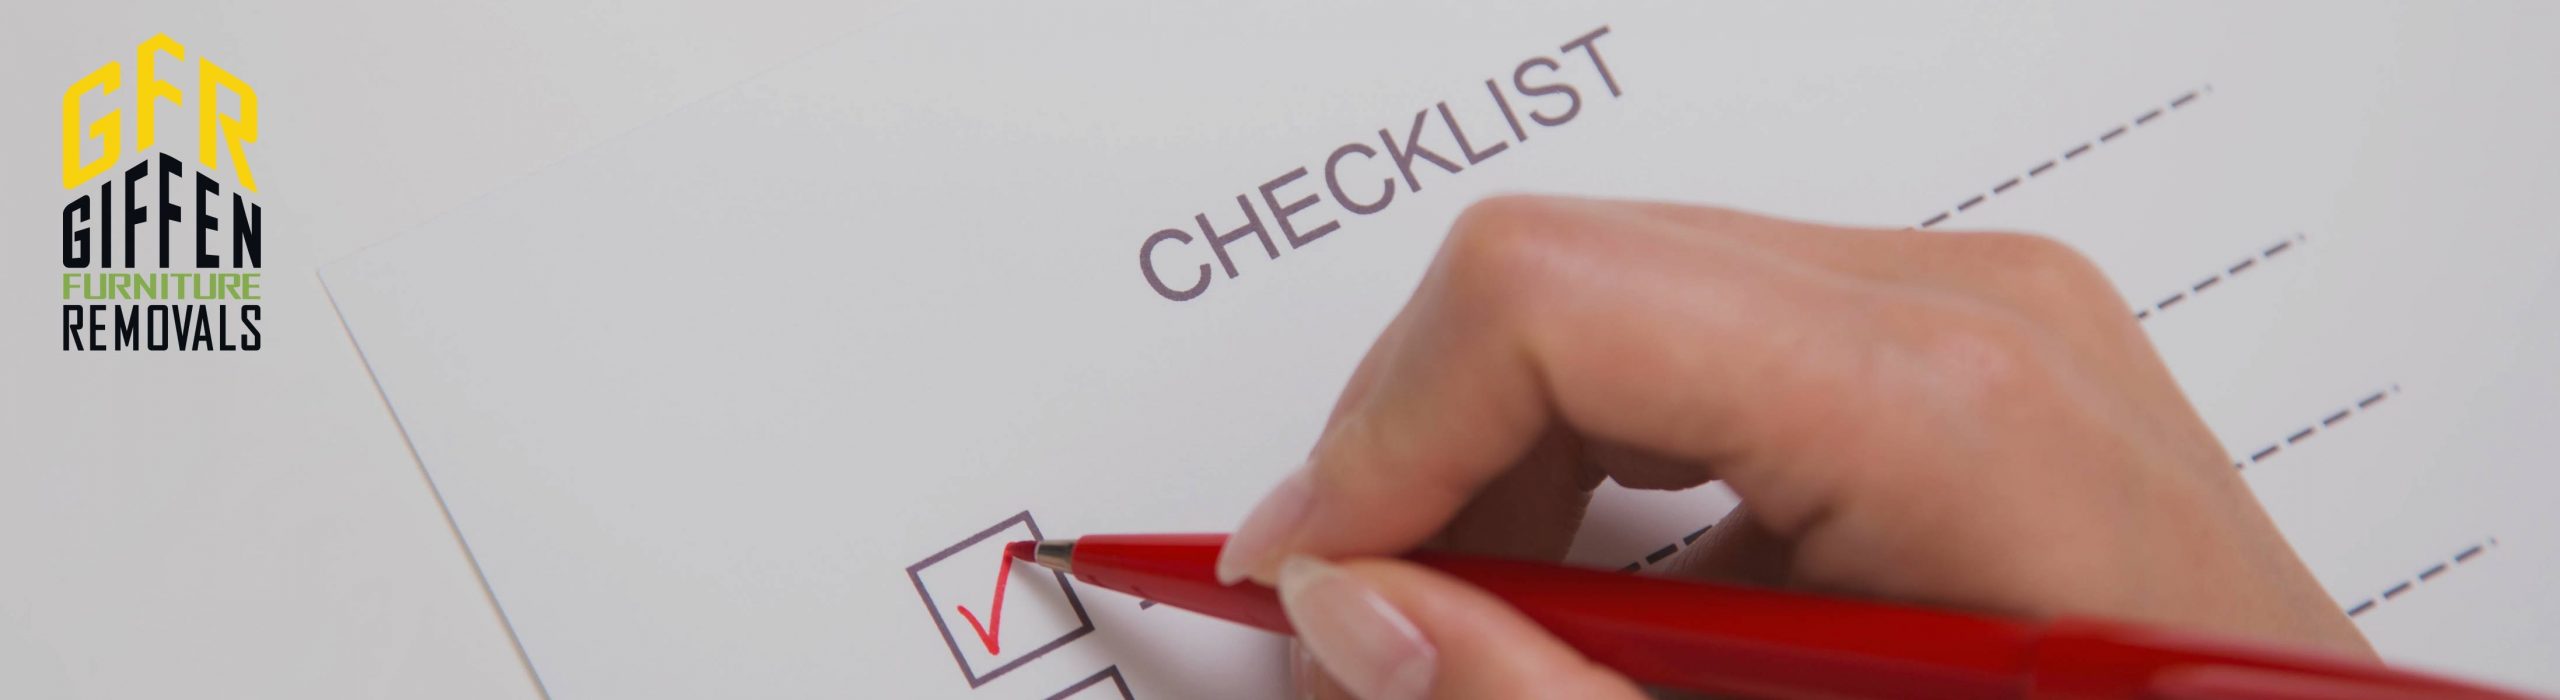 Giffen Furniture Removals The Checklist Everyone Needs When Moving House